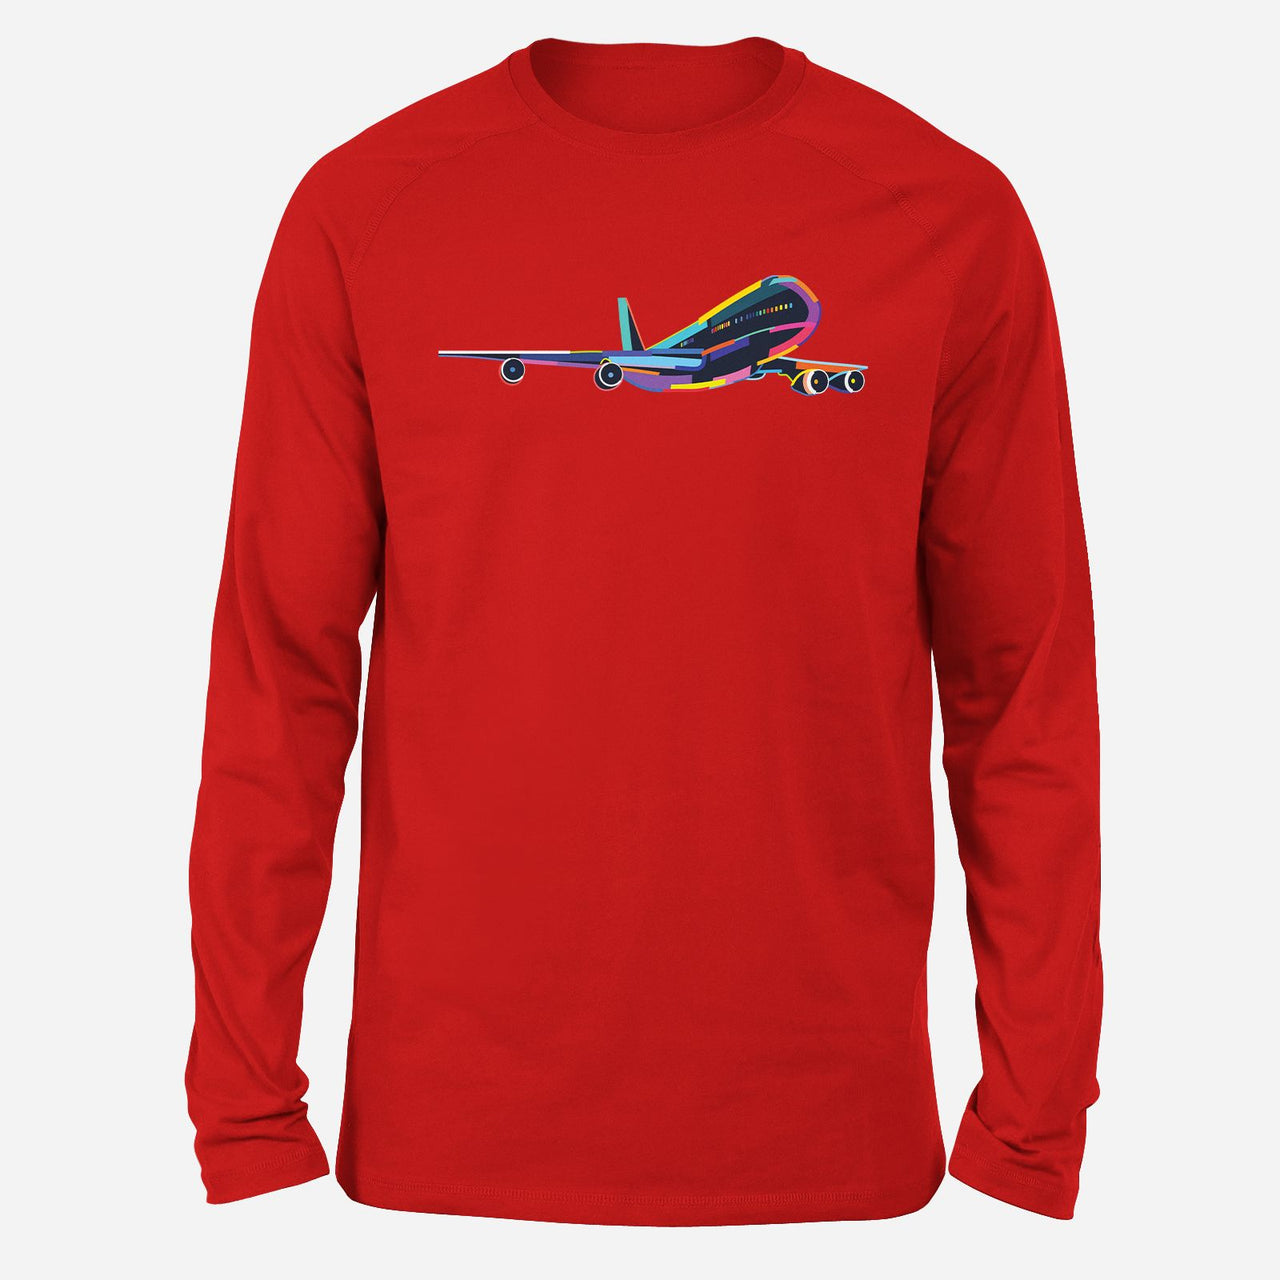 Multicolor Airplane Designed Long-Sleeve T-Shirts